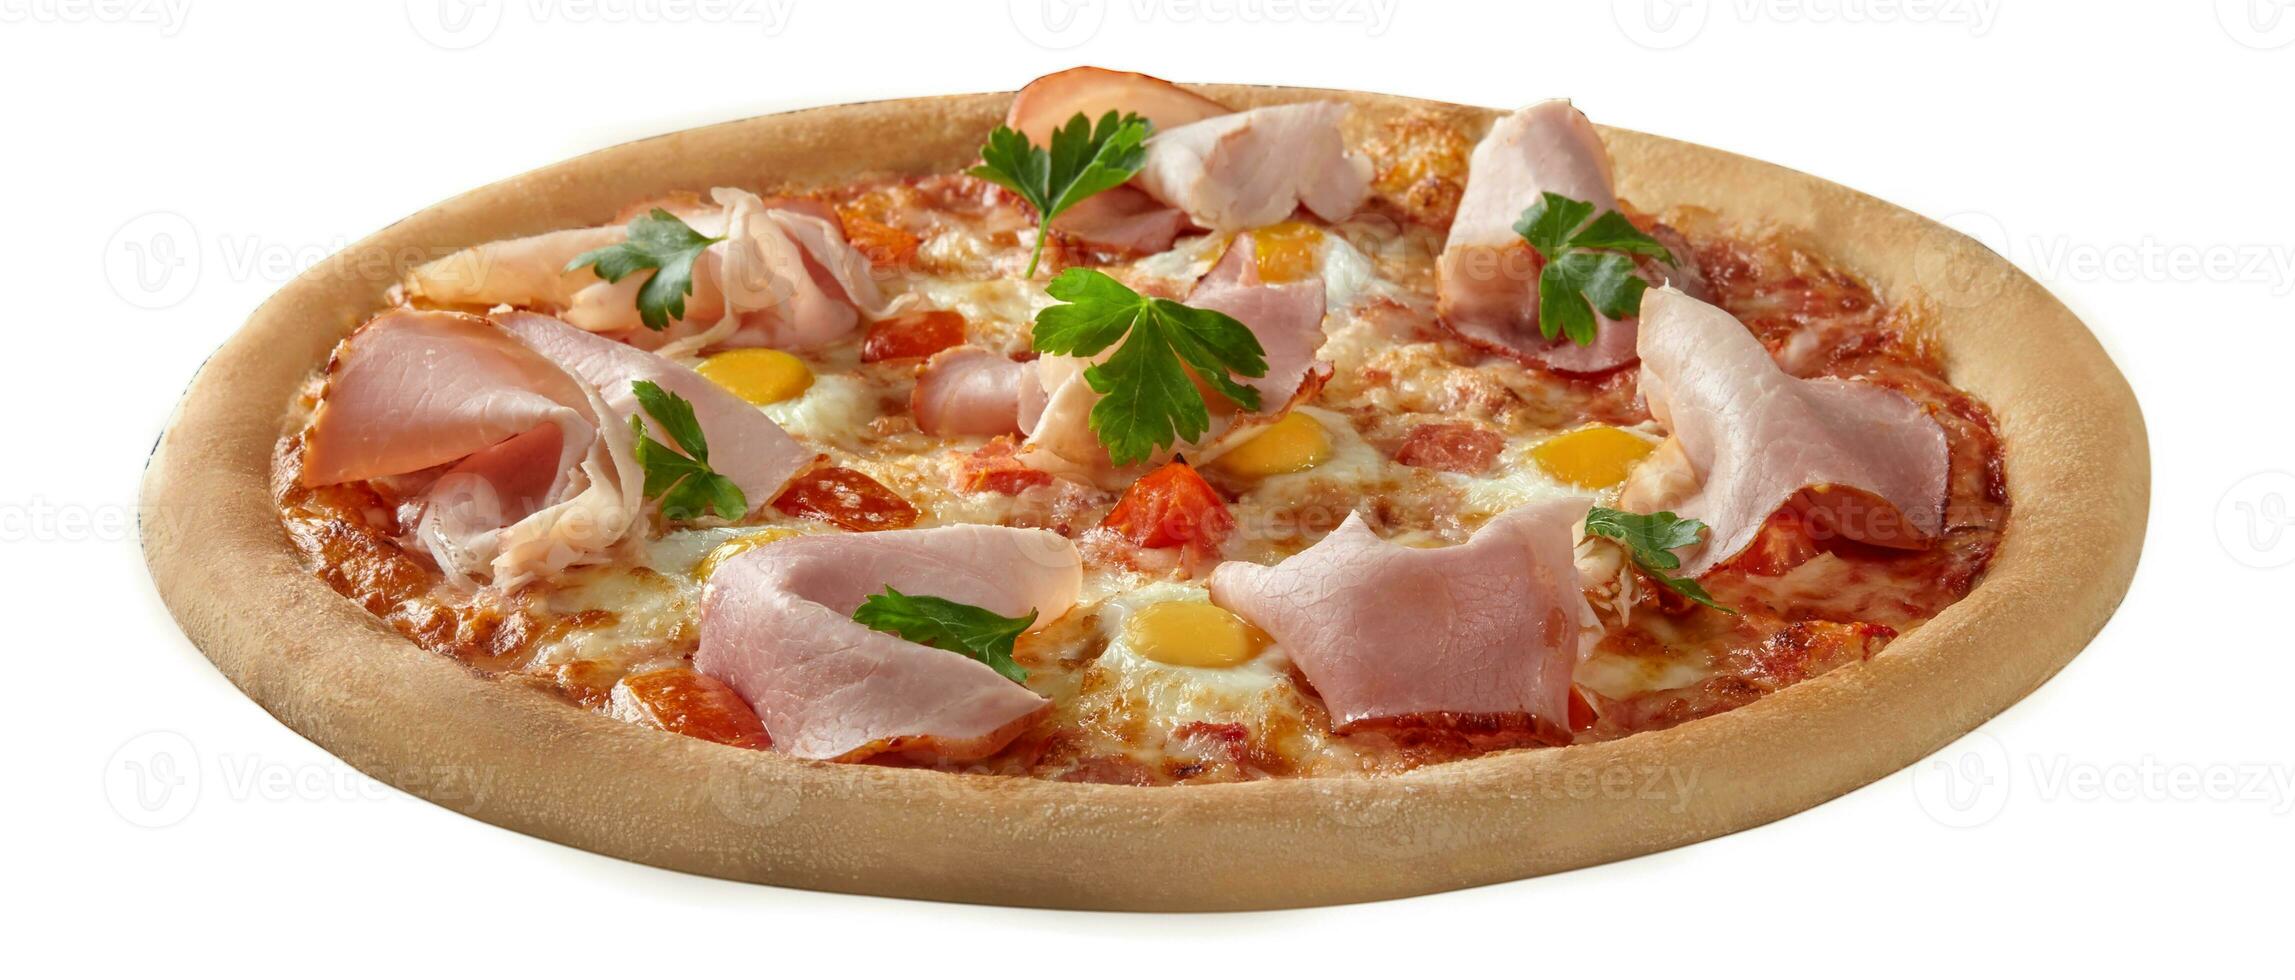 Pizza with sliced ham, quail eggs and tomatoes on pelati sauce, melted mozzarella and greens photo